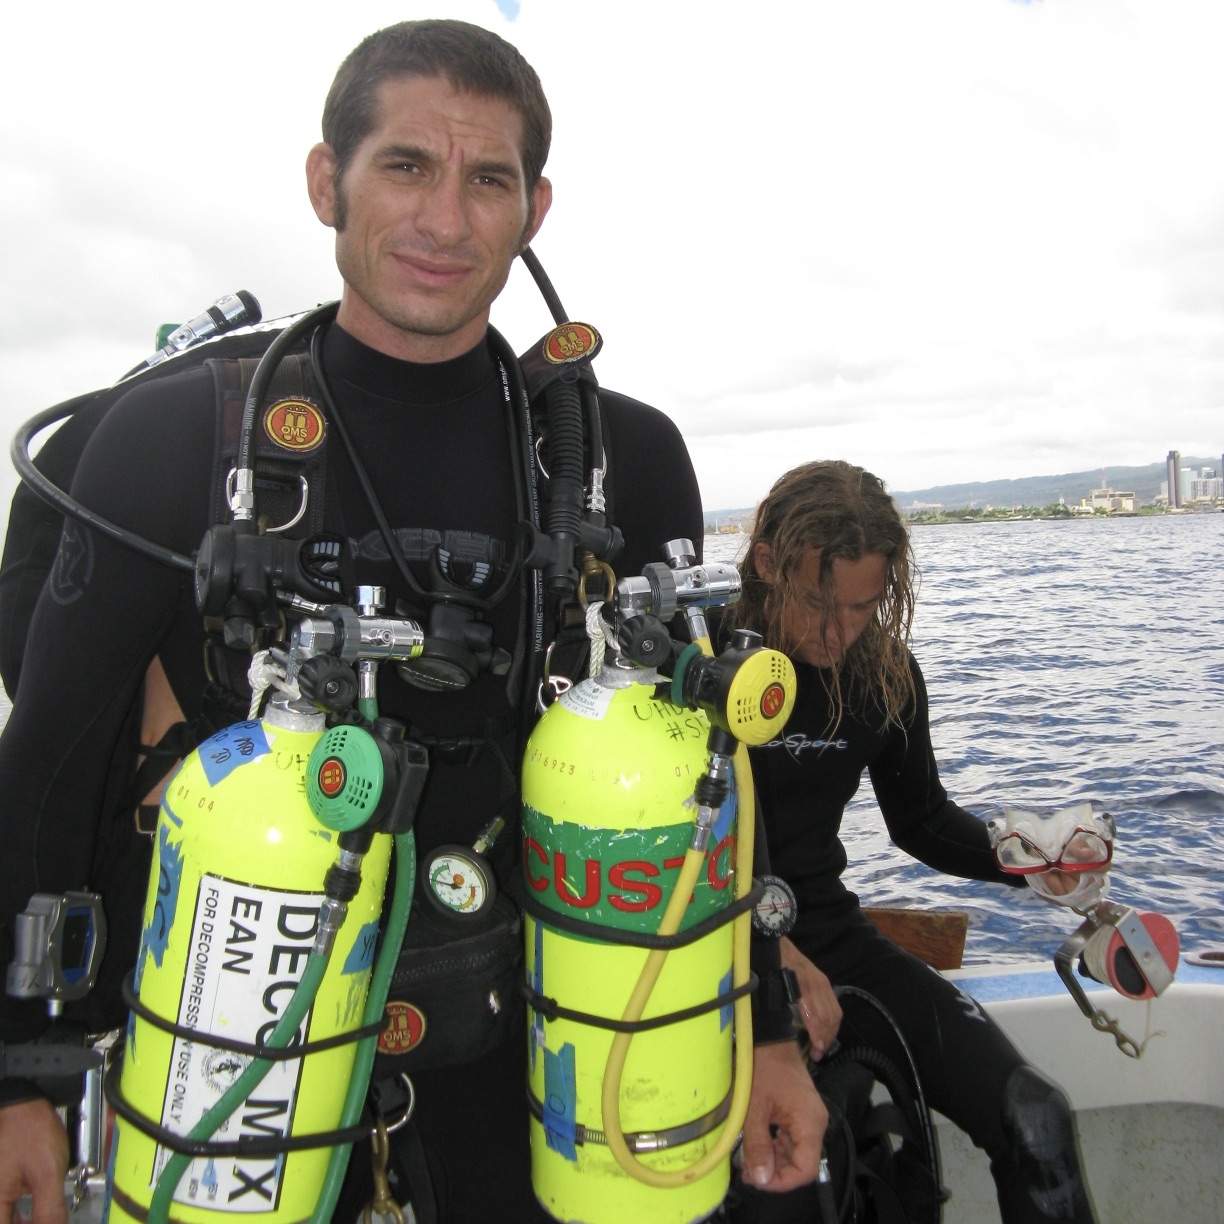 Making sure gear is checked and ready to go ahead of our dive.